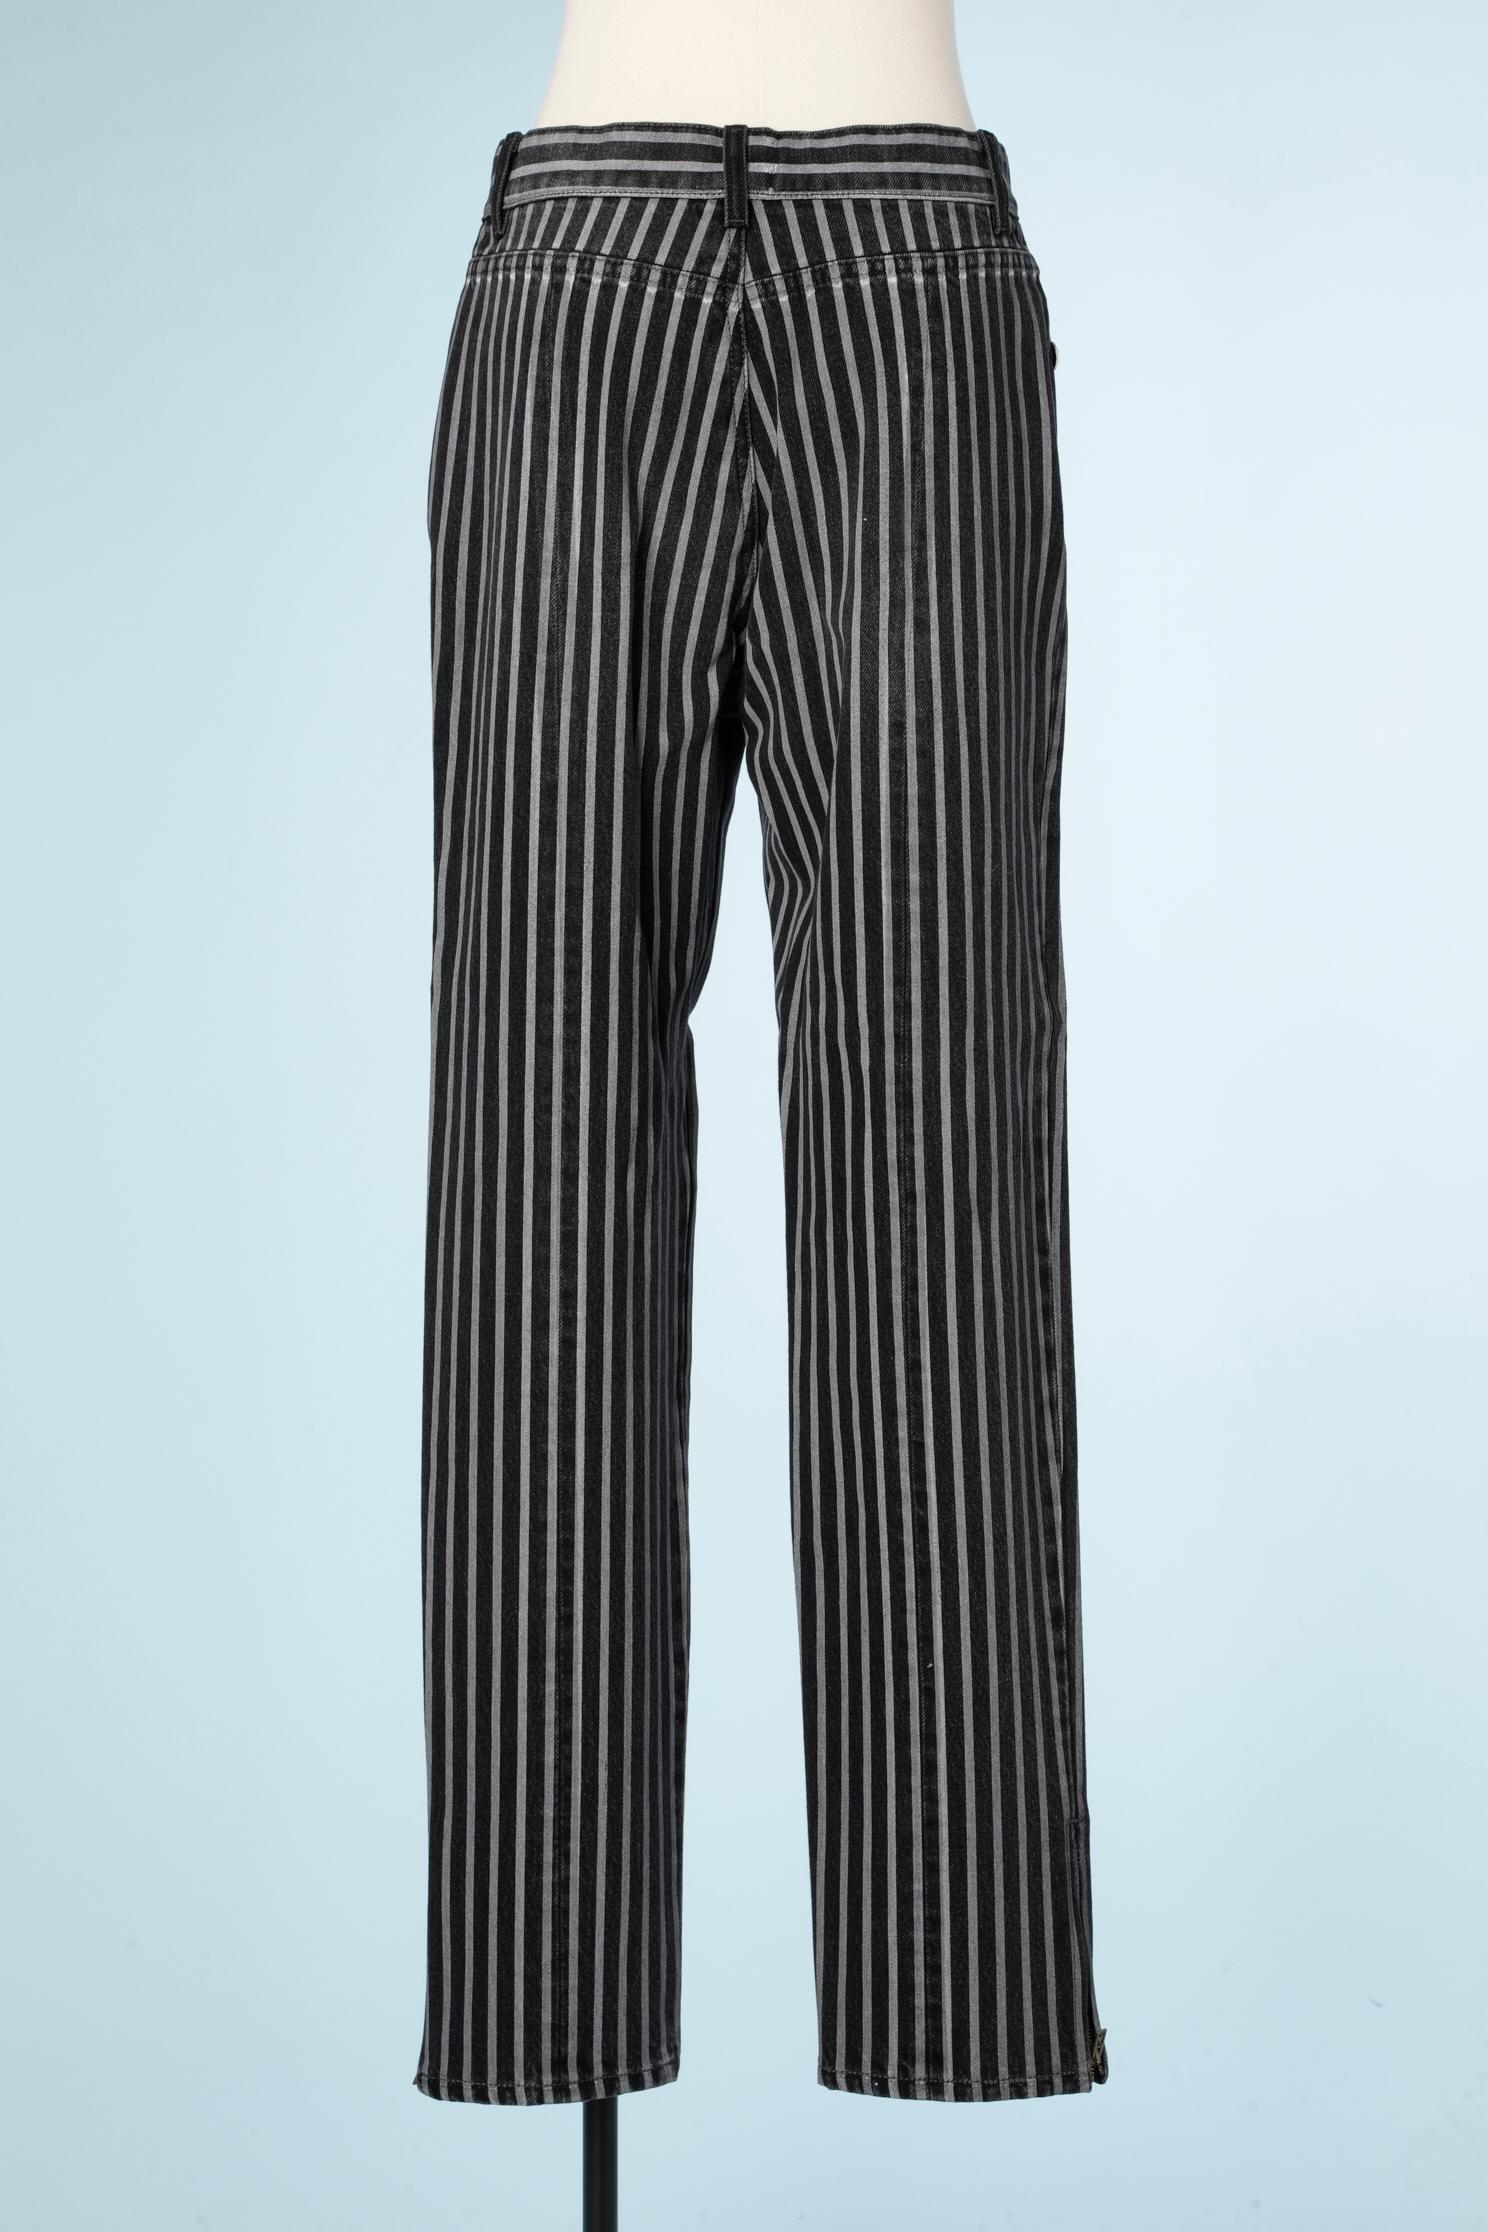 Women's or Men's Striped denim pants with branded buttons Chanel 